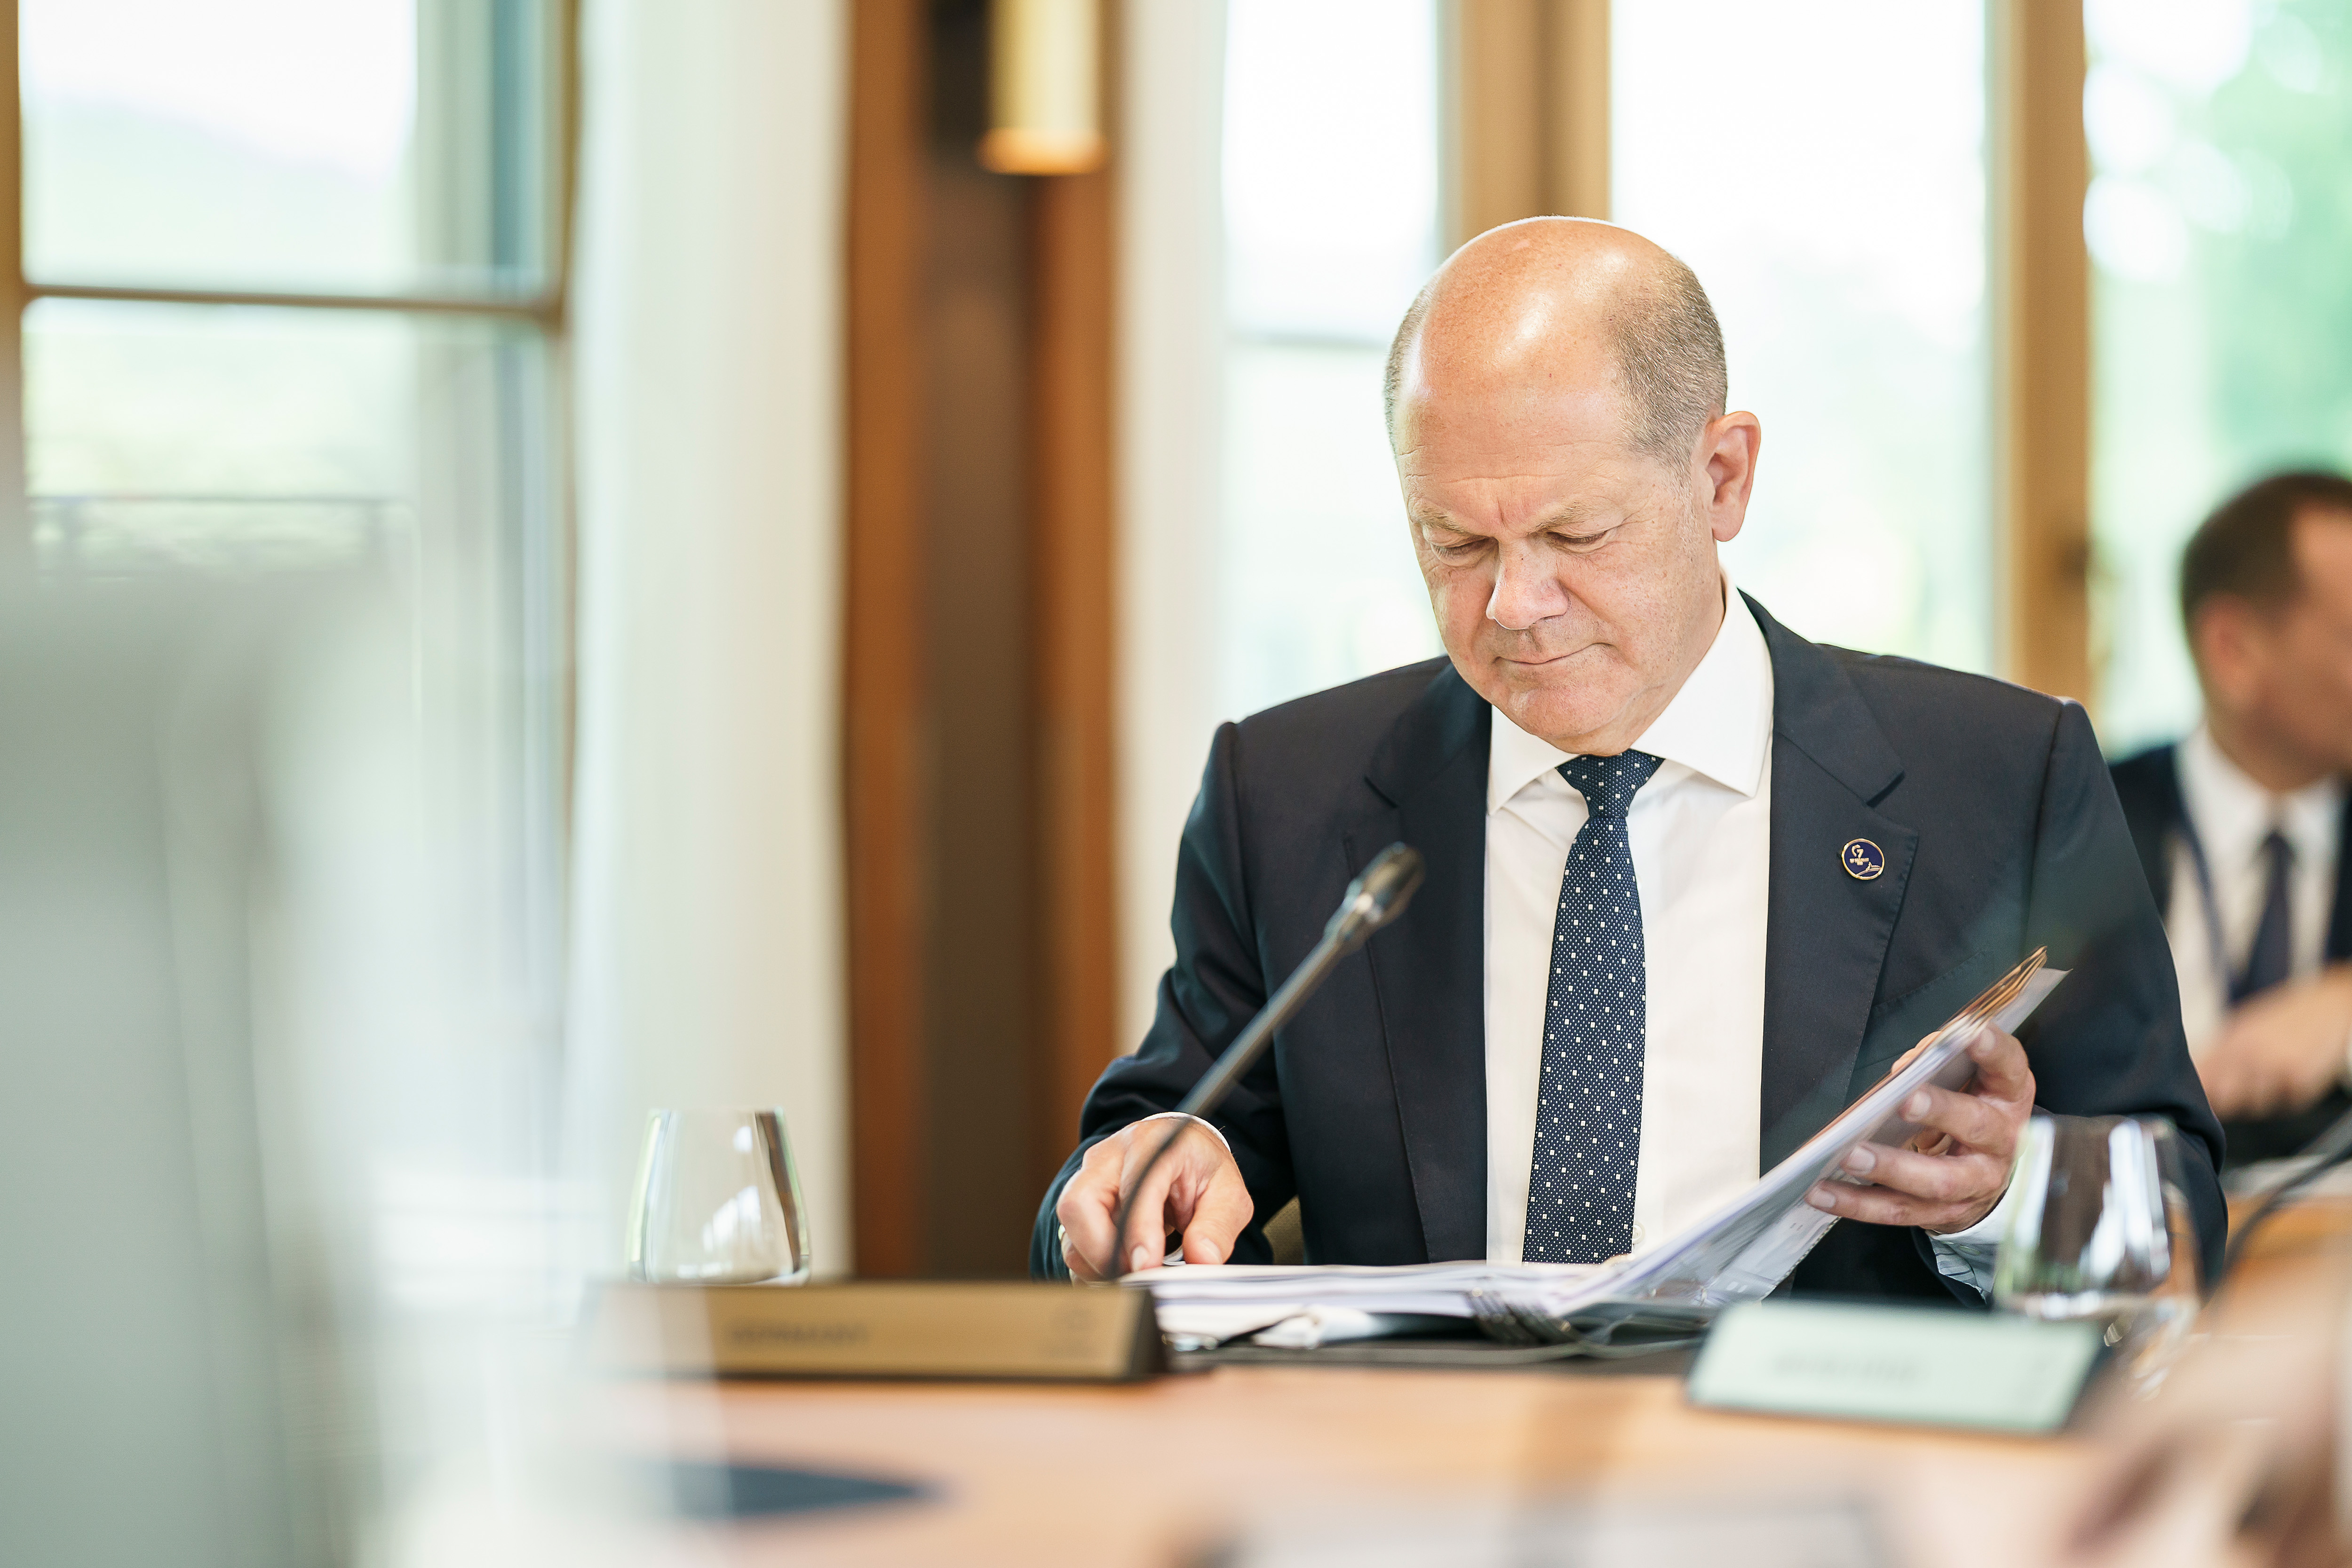 Federal Chancellor Olaf Scholz at the start of the first working session.